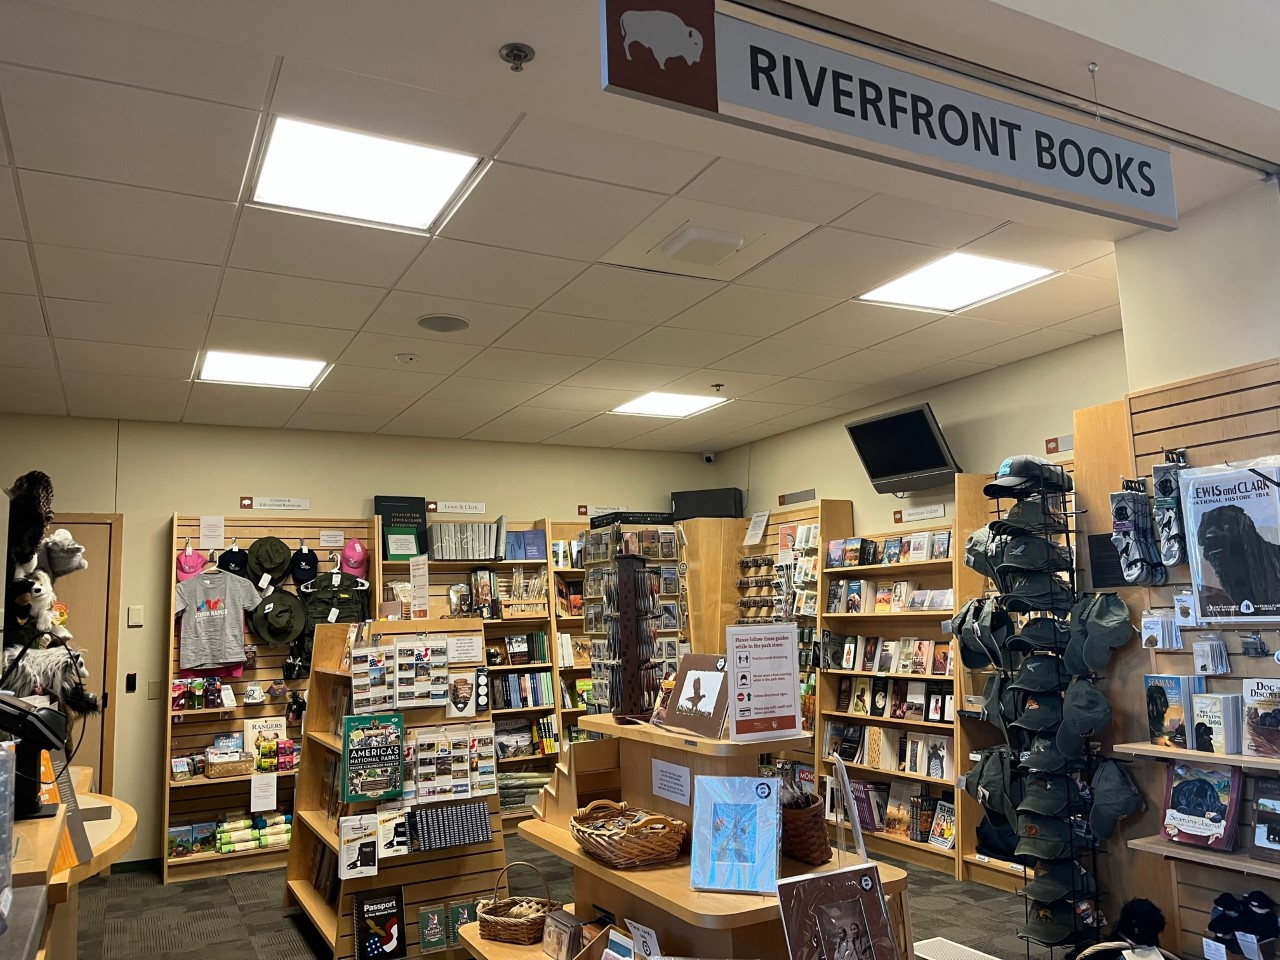 Small bookstore. Sign reads Riverfront books. Racks ine walls with books, tshirts, and memorabilia.